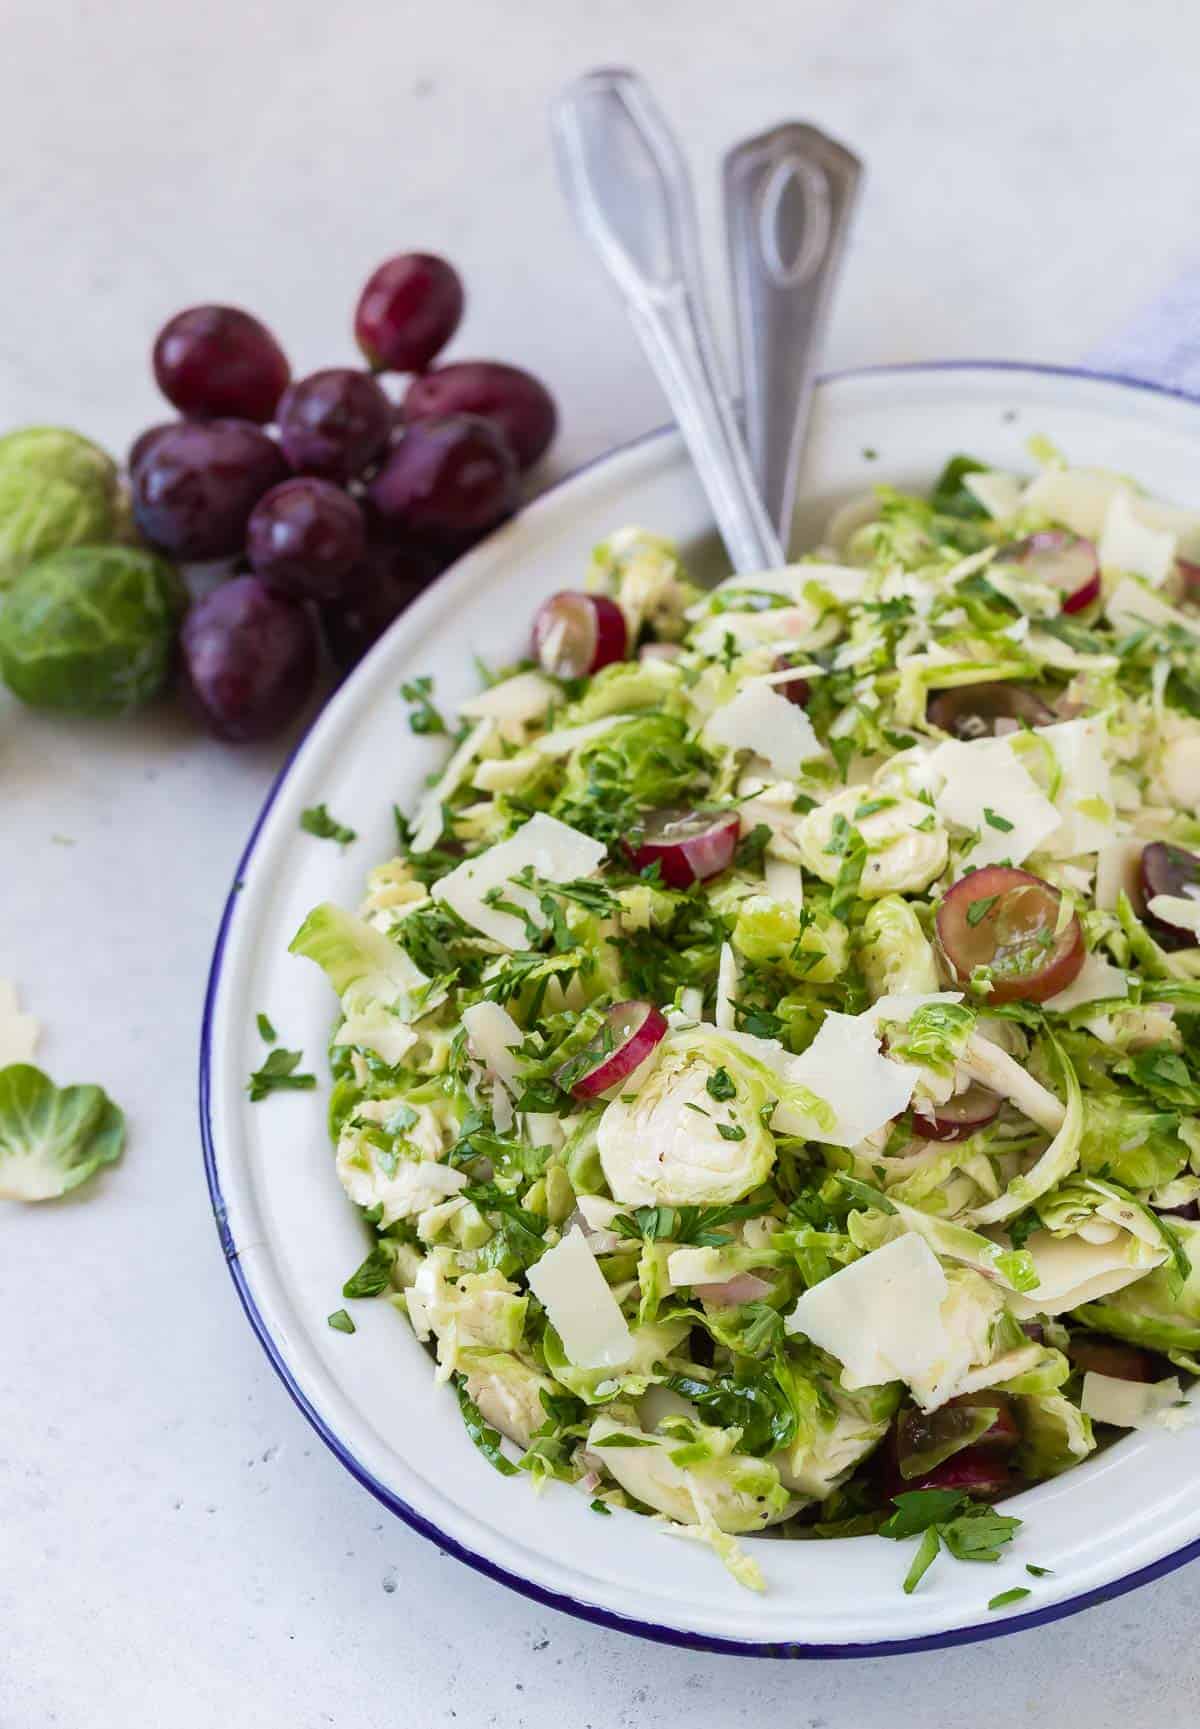 Shredded brussels sprouts salad with red grapes